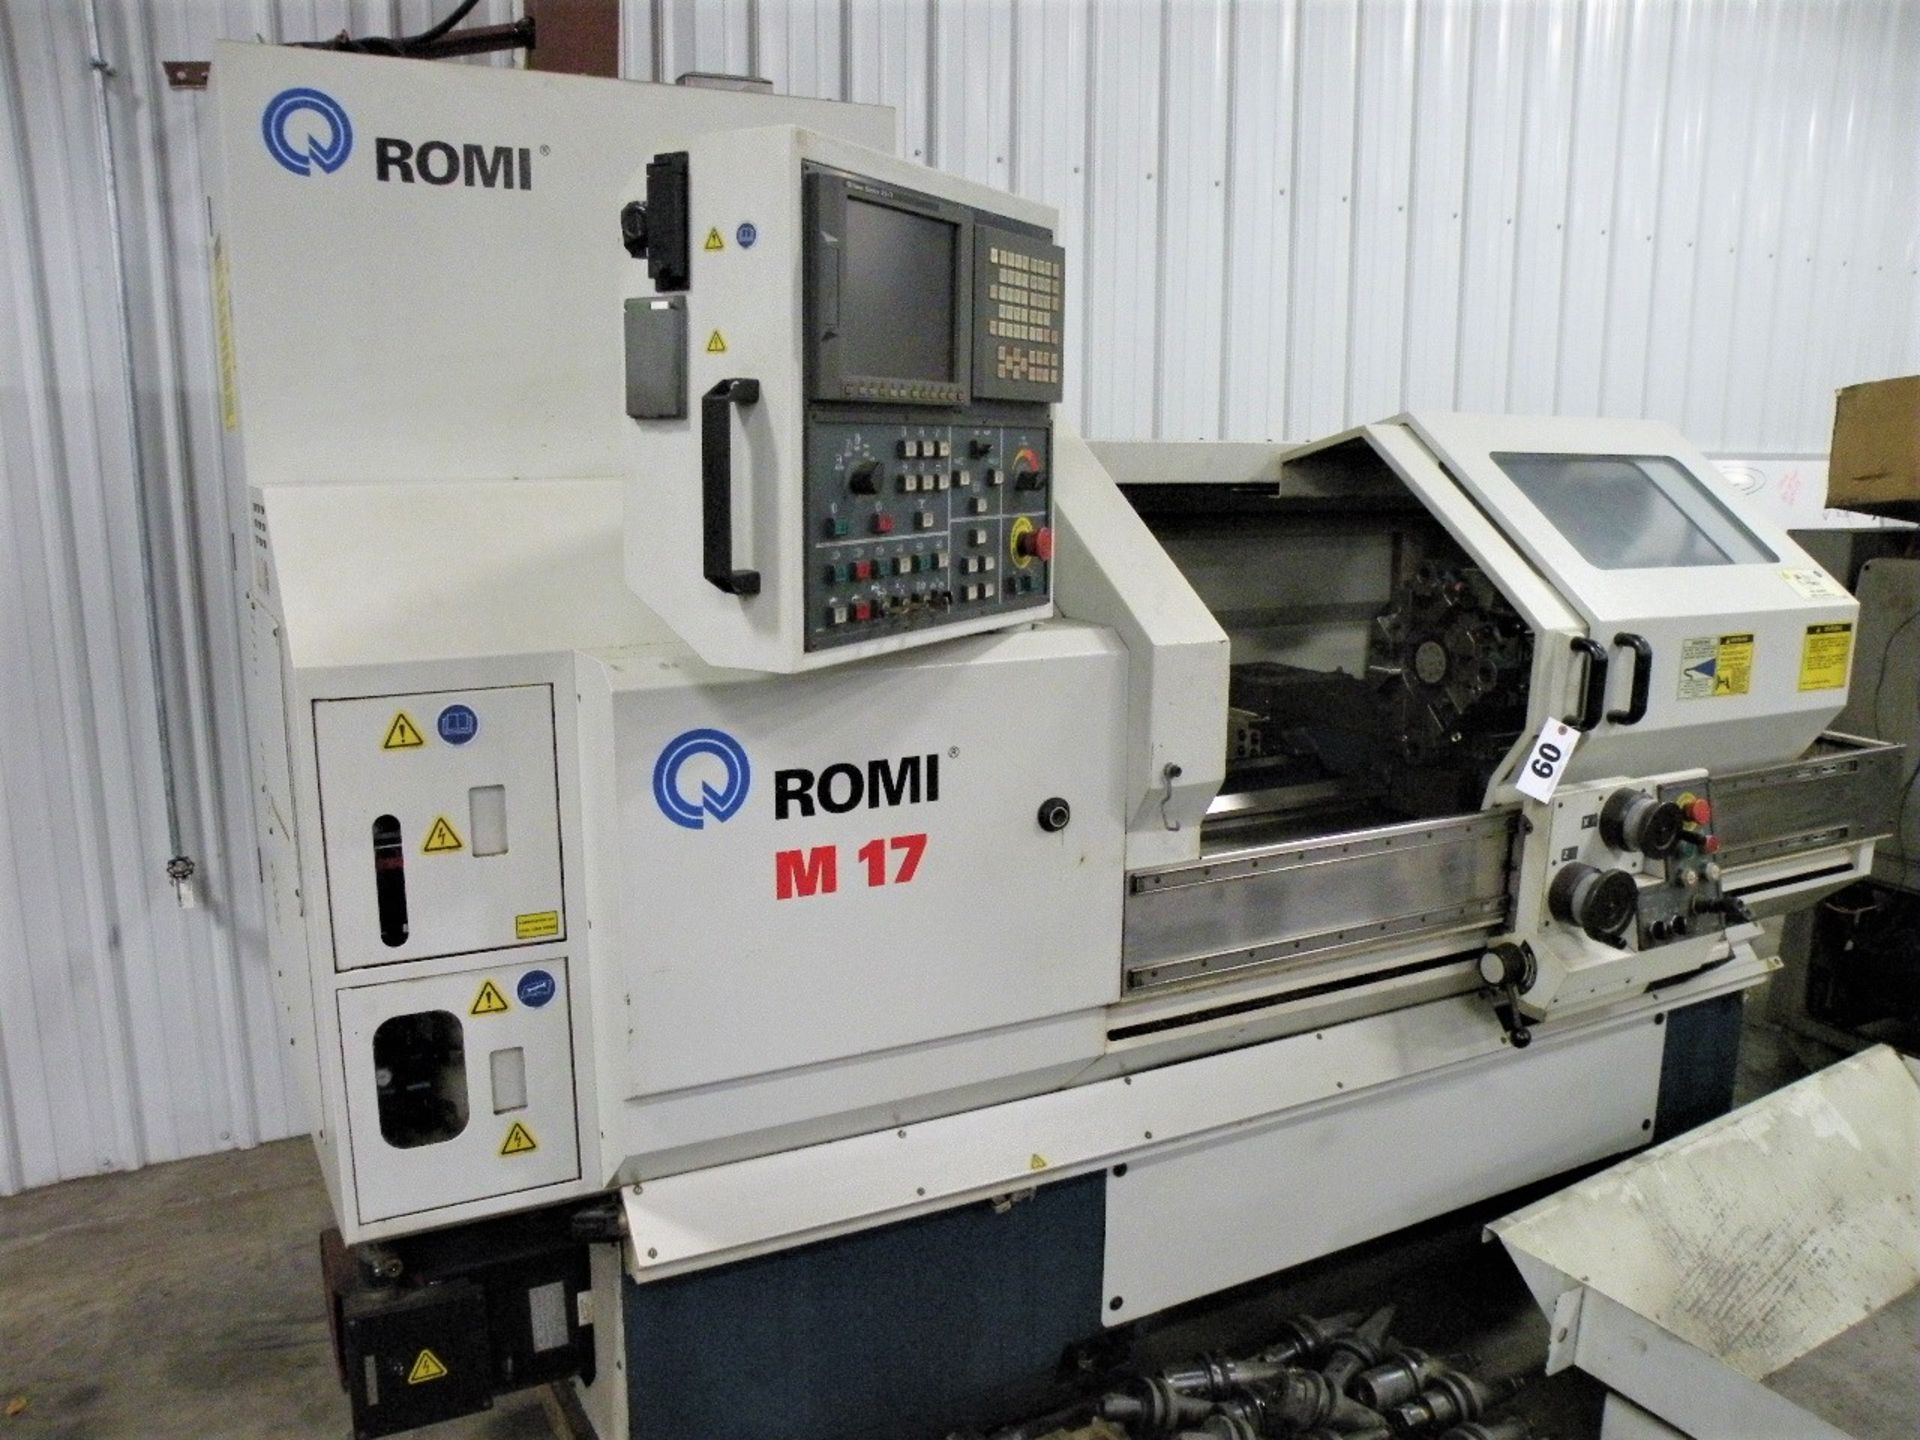 ROMI M17 CNC LATHE, Yr-2000, 3000 Max Spindle RPM (Hopkinsville) - Image 2 of 4